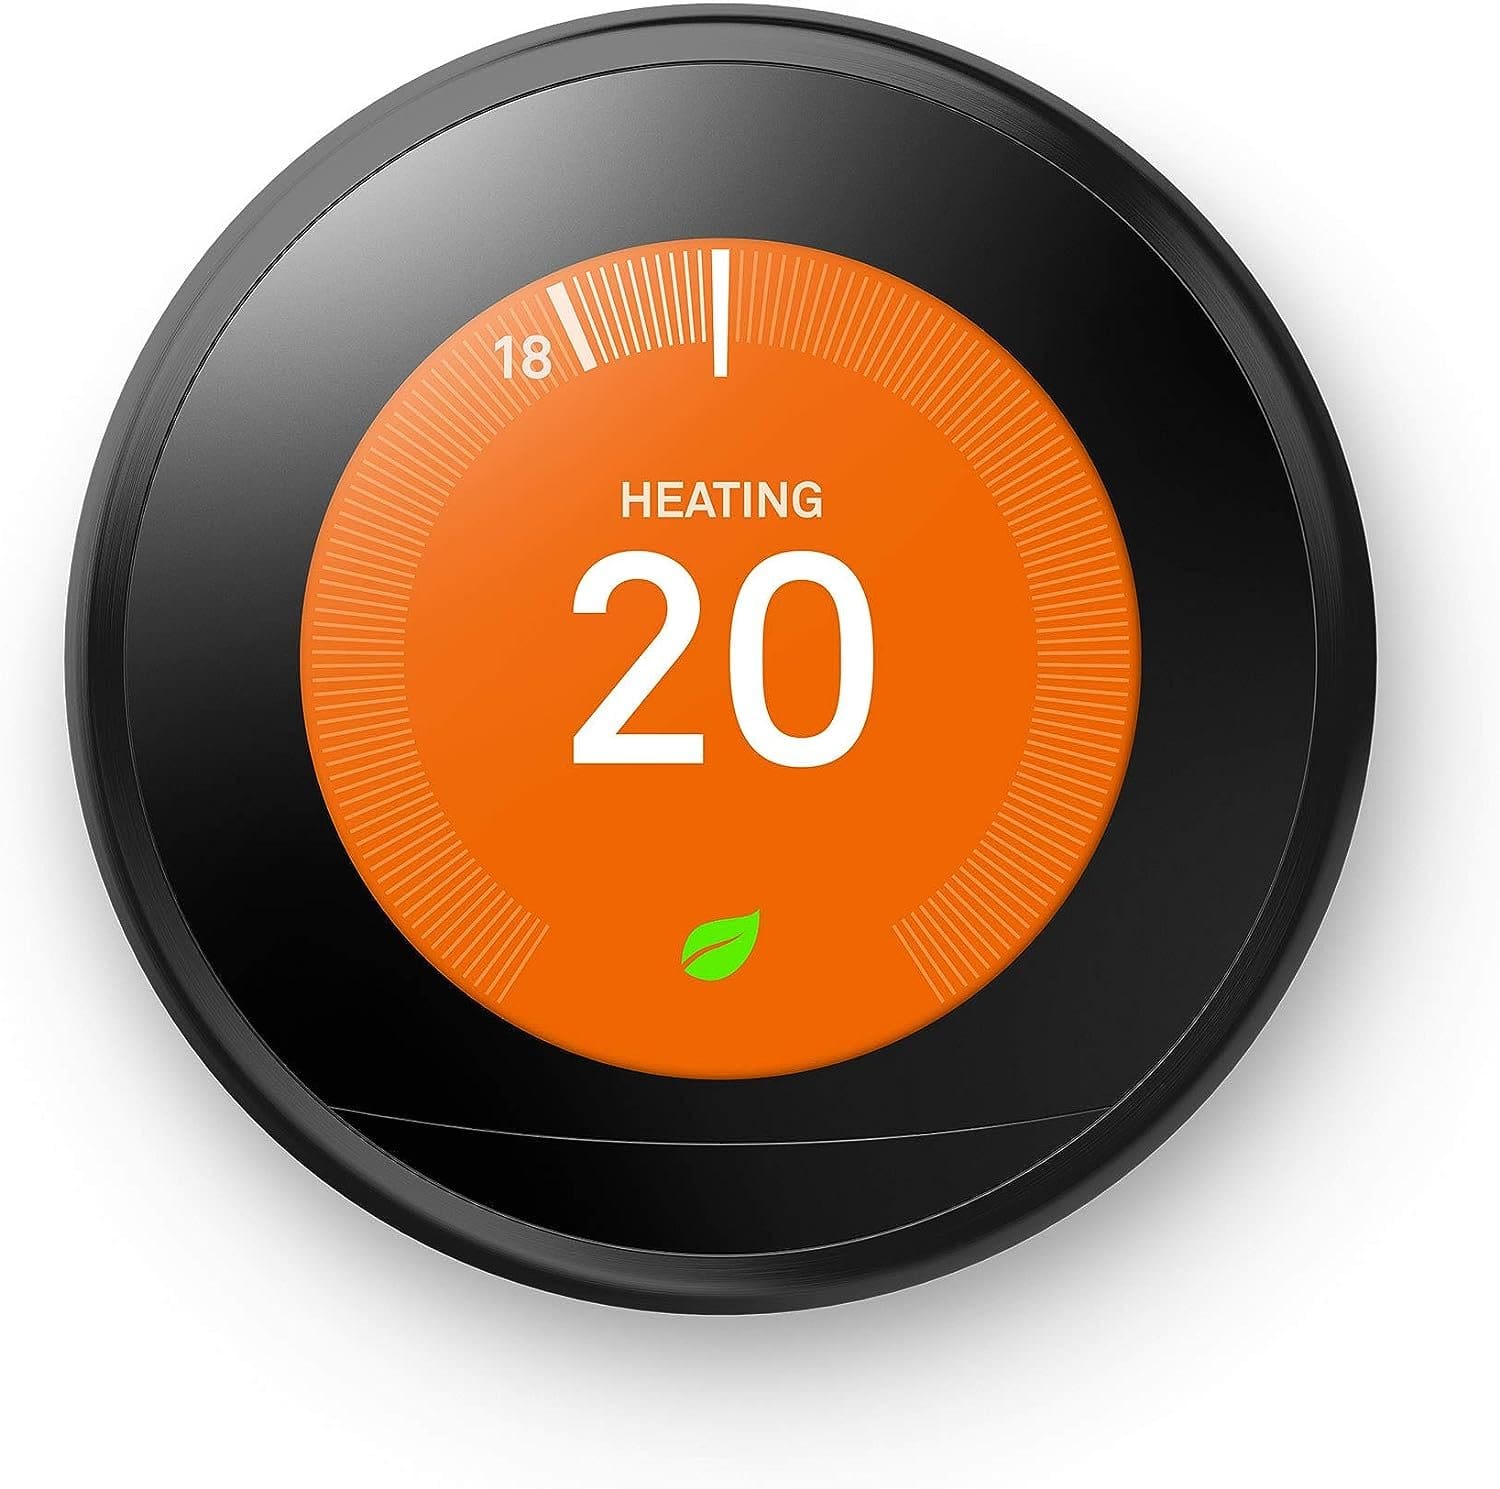 What Should I Look For When Shopping For A Smart Thermostat?